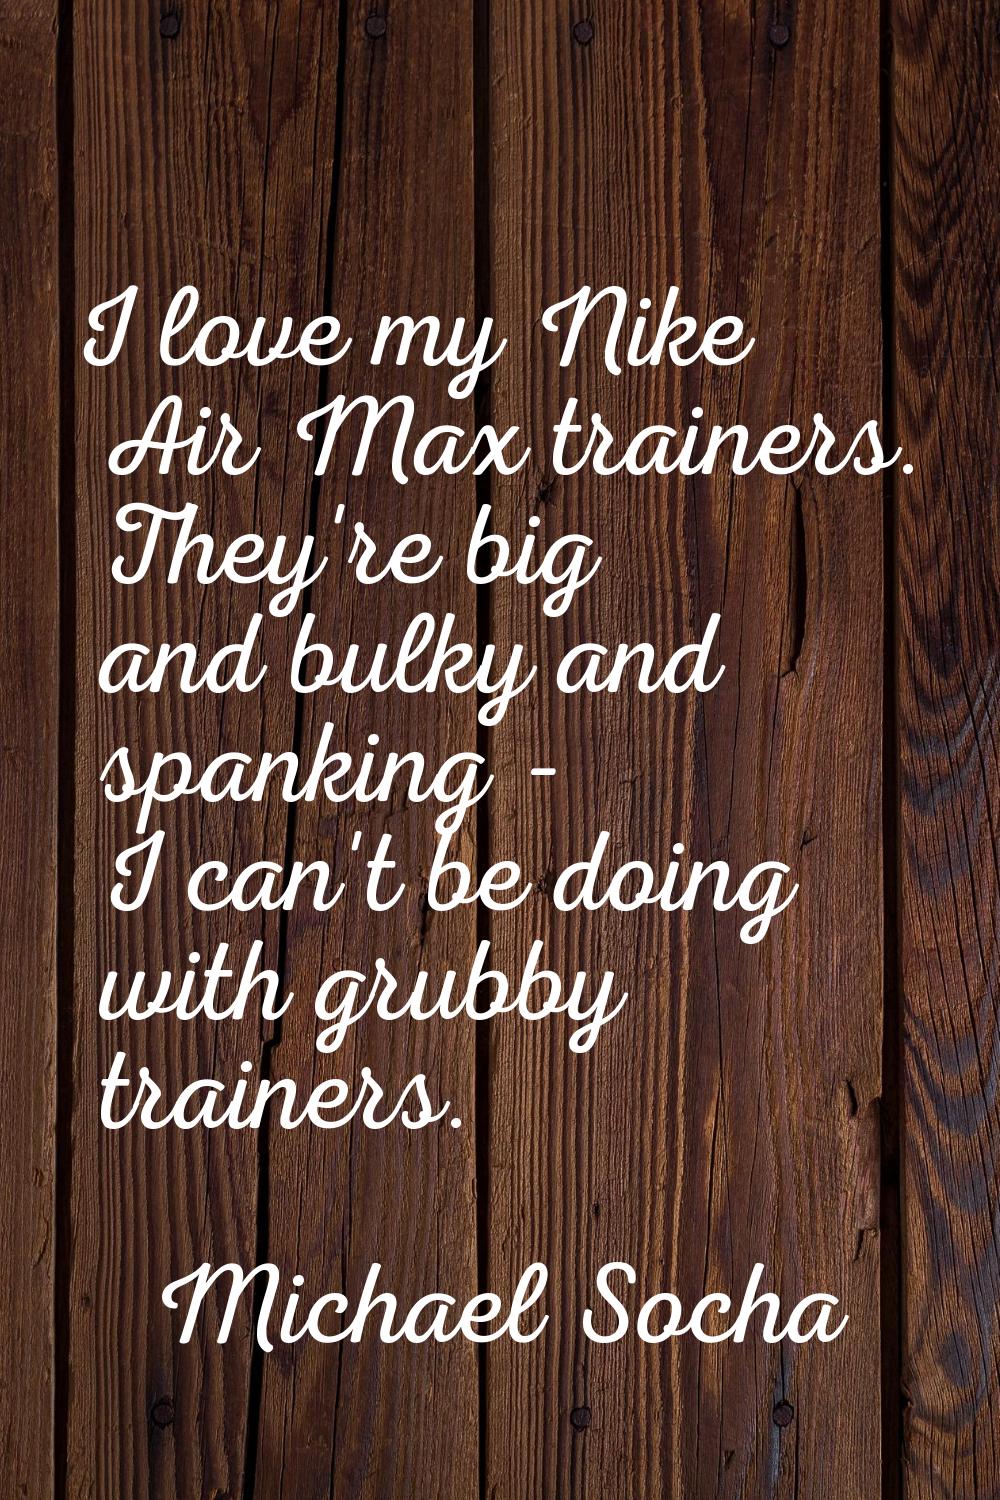 I love my Nike Air Max trainers. They're big and bulky and spanking - I can't be doing with grubby 